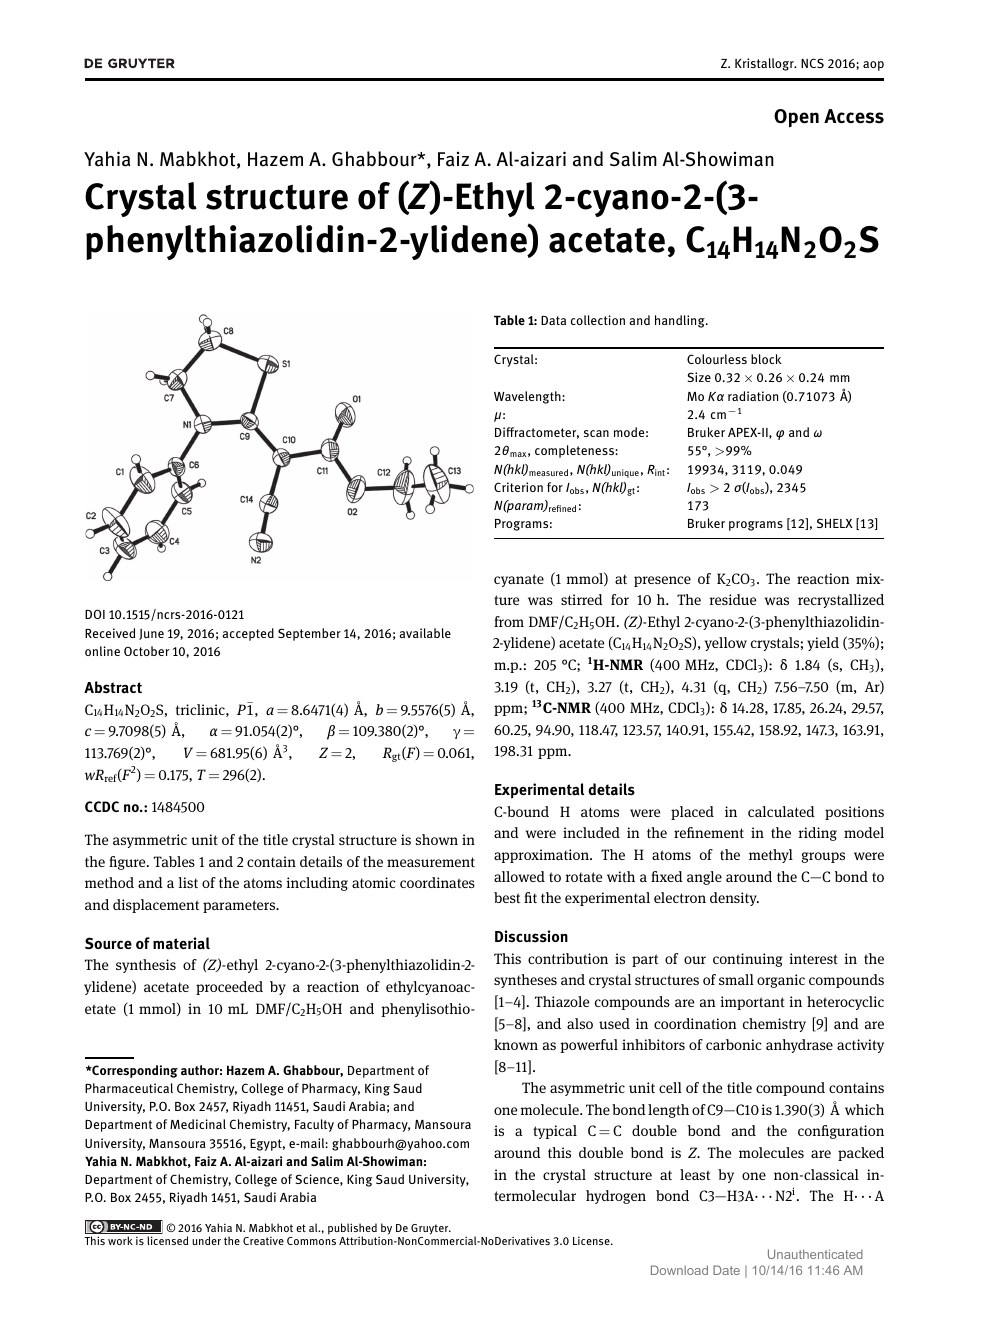 Crystal Structure Of Z Ethyl 2 Cyano 2 3 Phenylthiazolidin 2 Ylidene Acetate C14h14n2o2s Topic Of Research Paper In Chemical Sciences Download Scholarly Article Pdf And Read For Free On Cyberleninka Open Science Hub